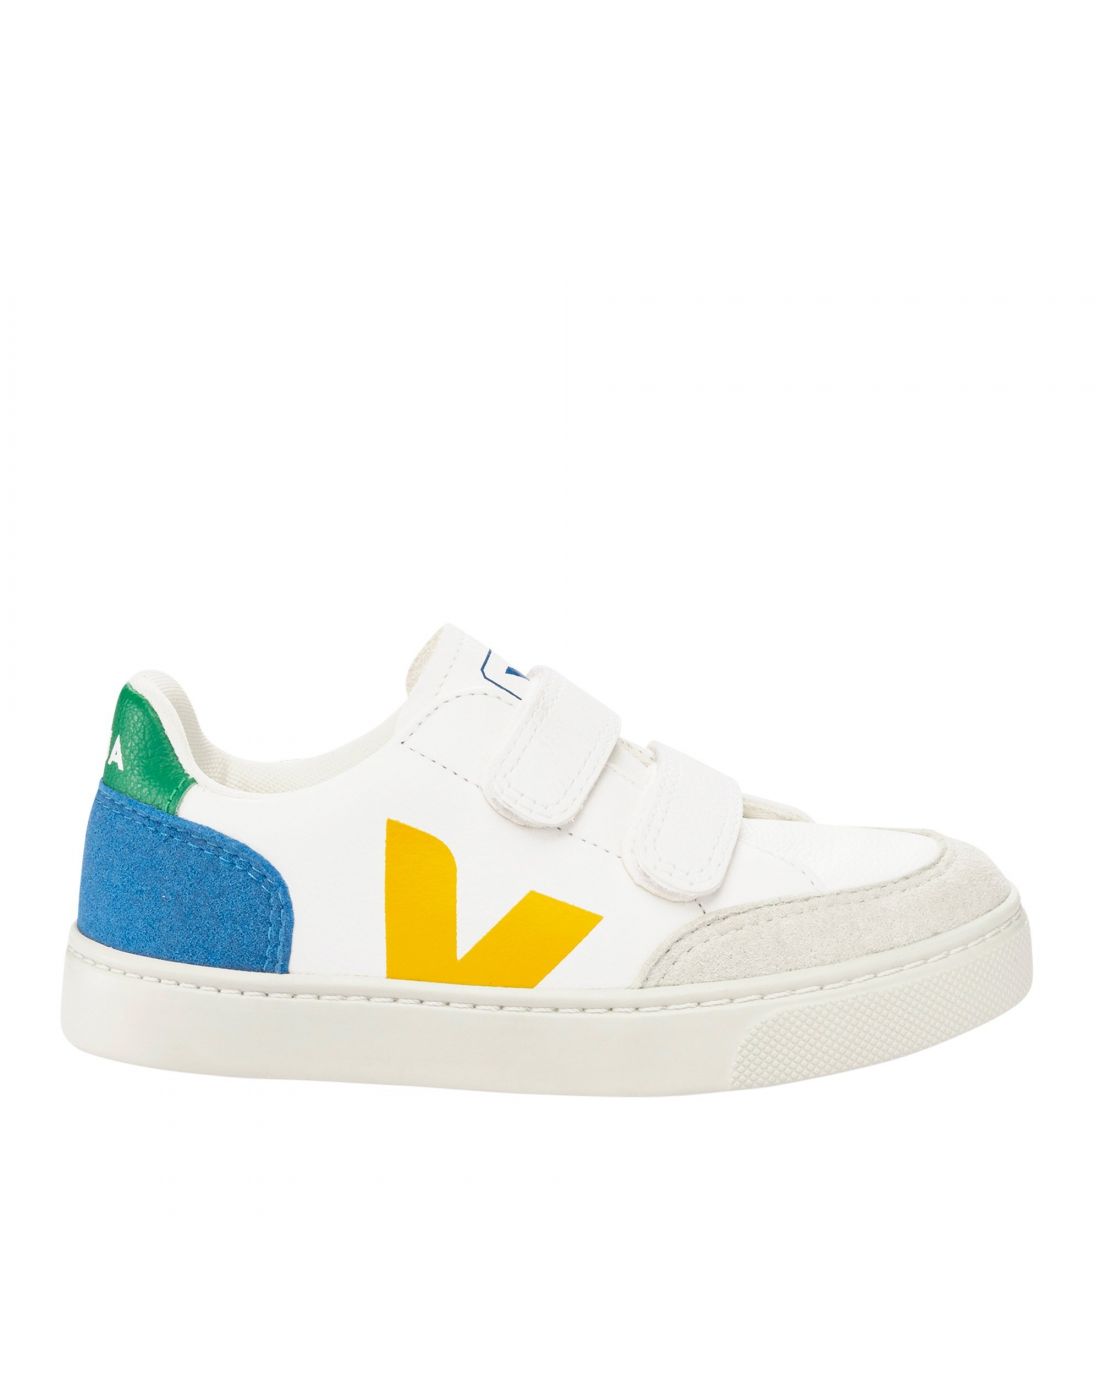 Veja Children's Sneakers Shoes | LAPIN KIDS